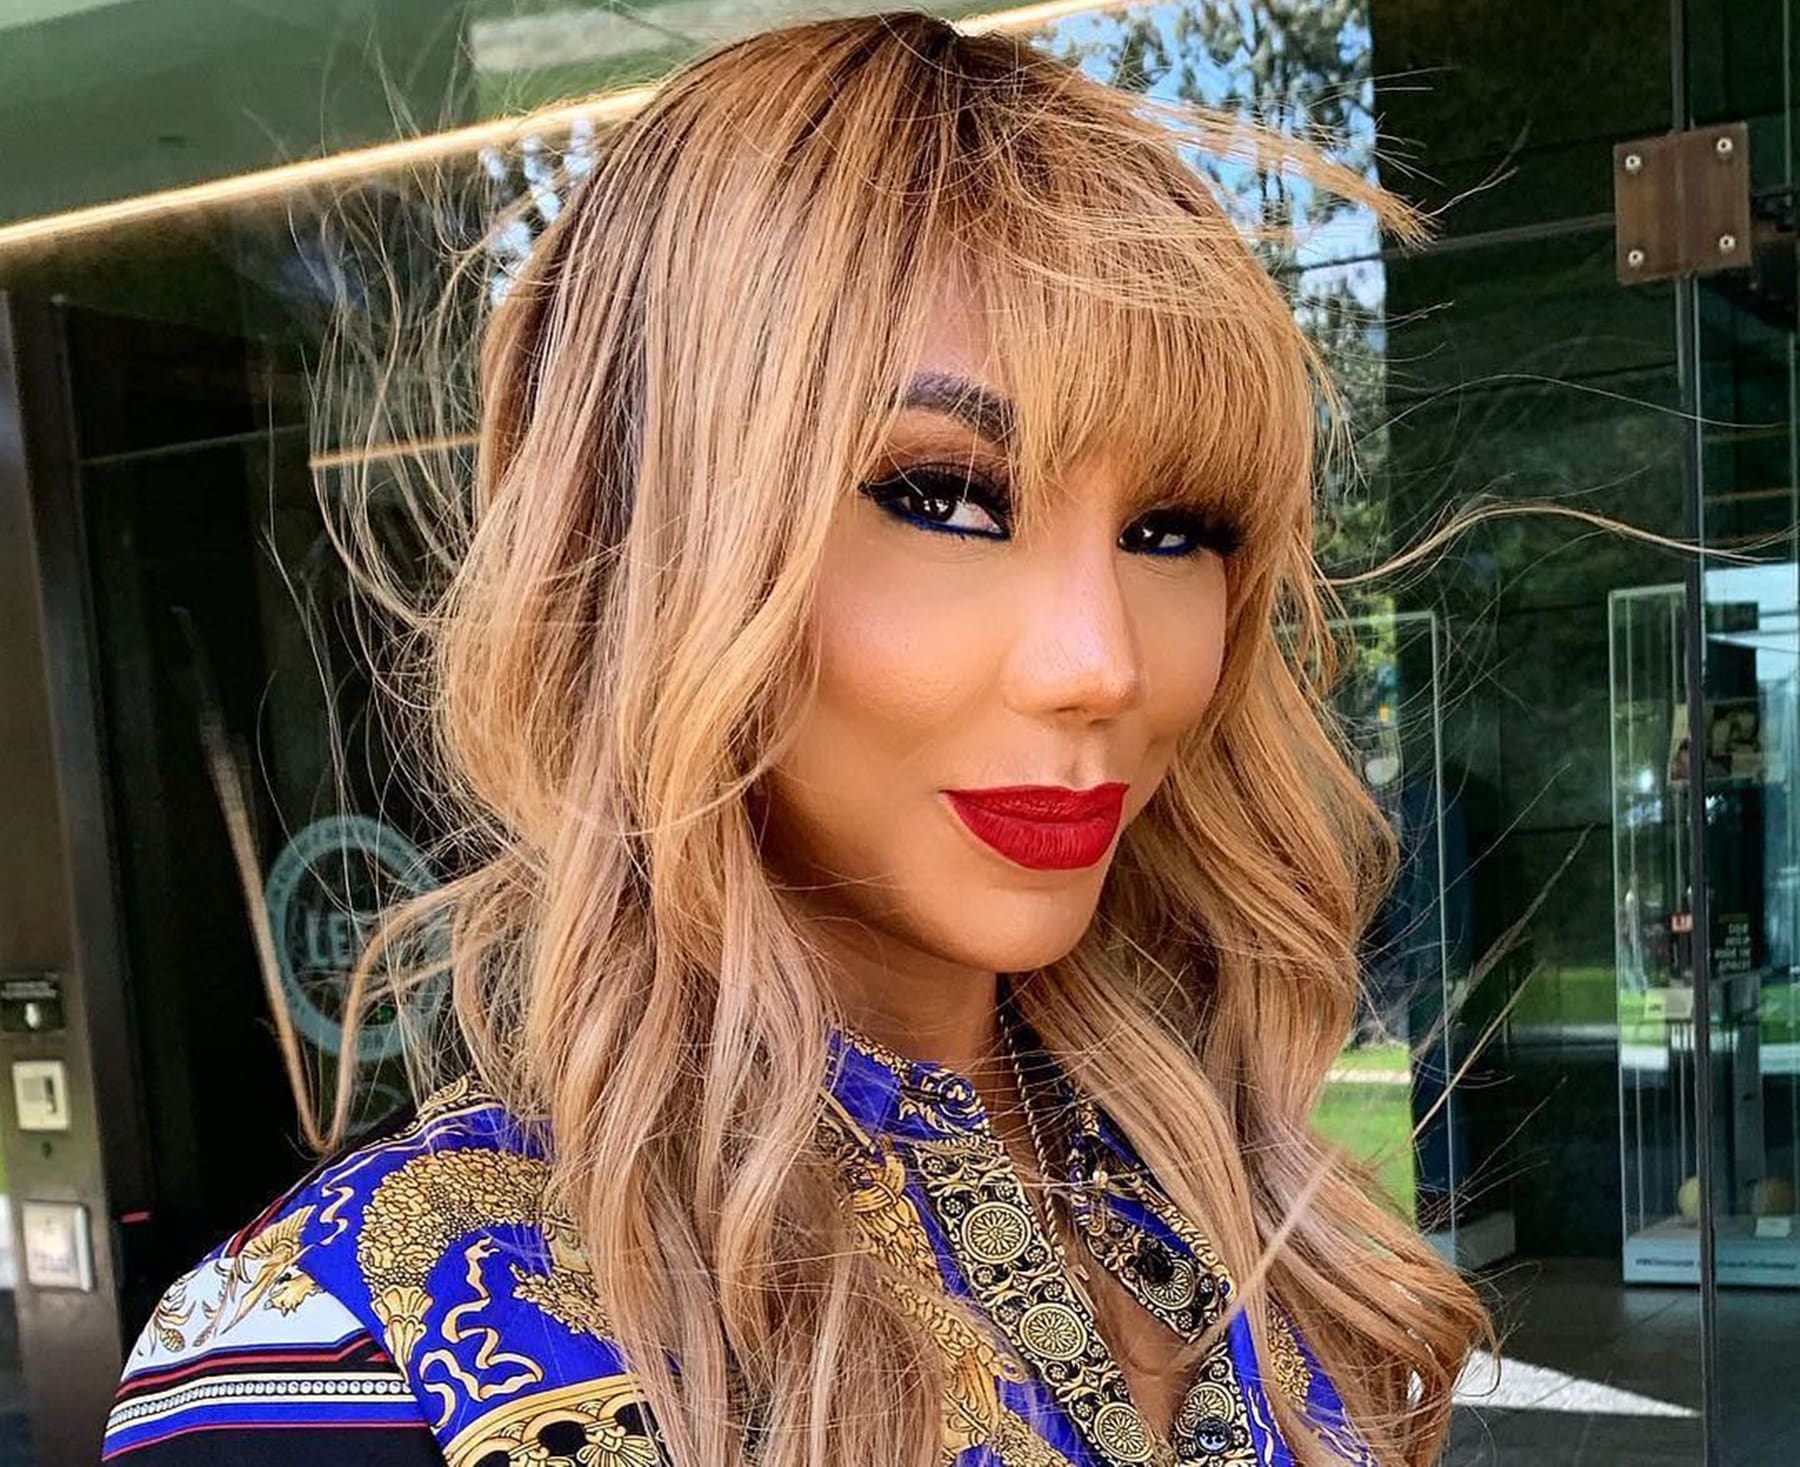 Tamar Braxton Parties During A Special Episode Of Hip Hop Squares - See The Video